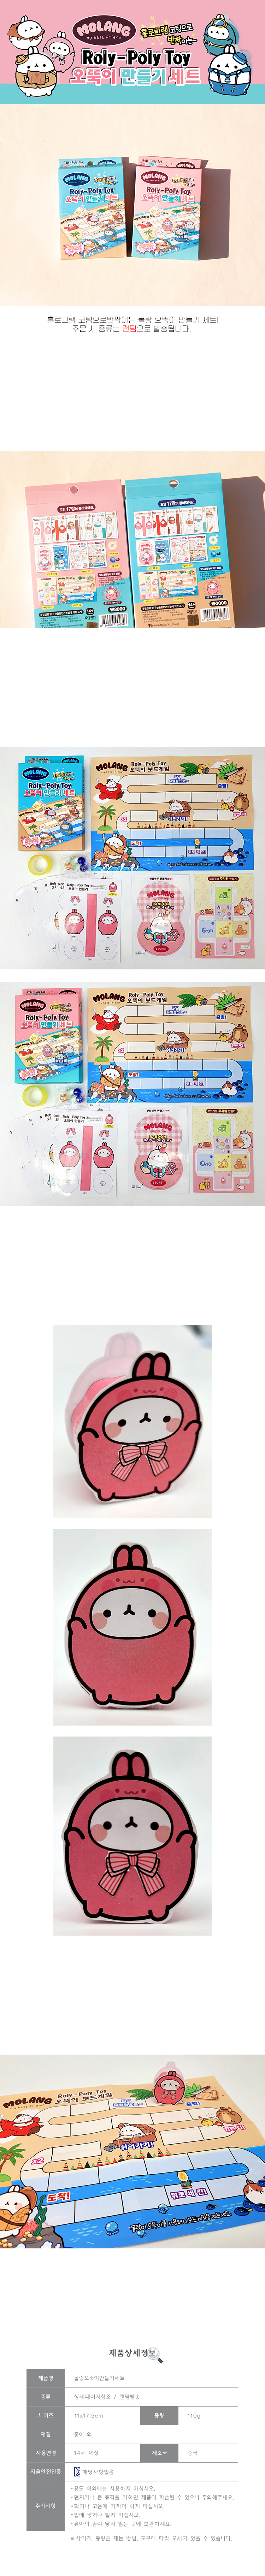 3molang_rolypoly_toy_set.jpg